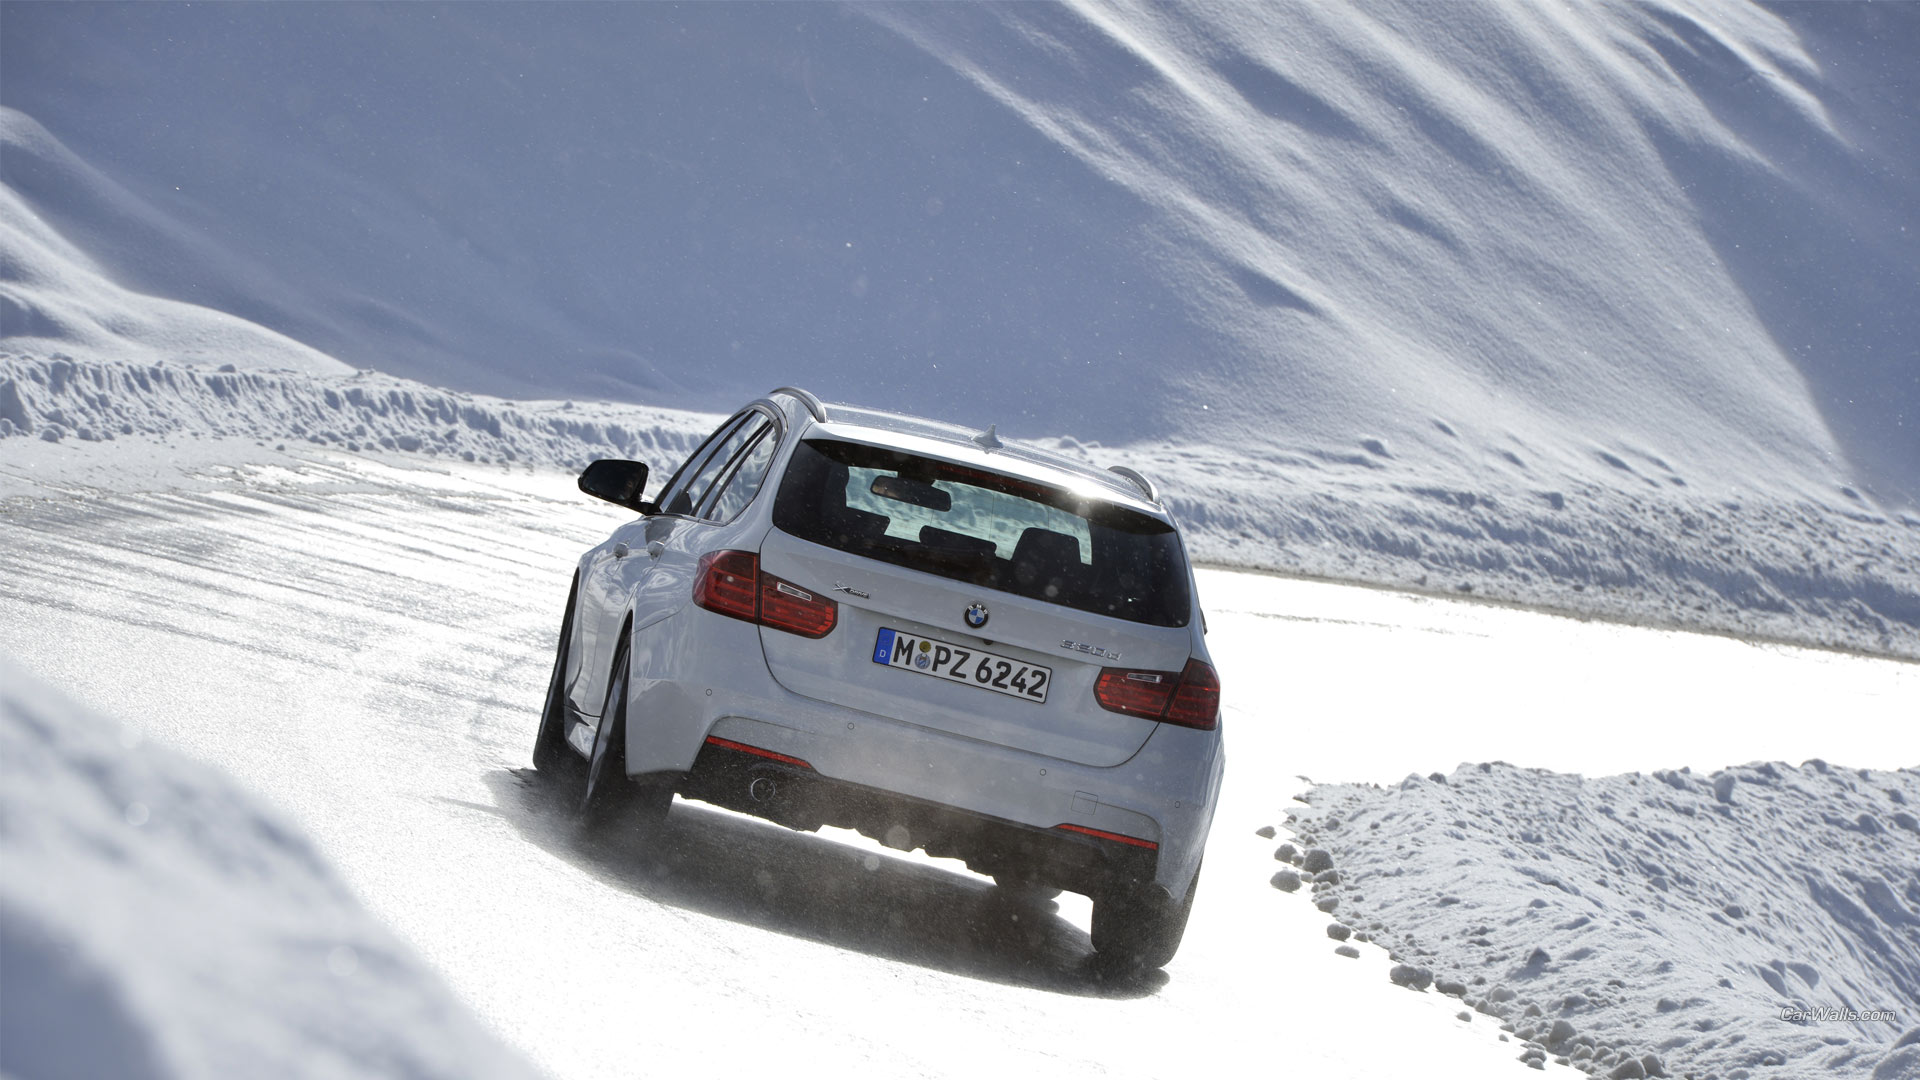 Vehicles 2013 BMW 320d HD Wallpaper | Background Image